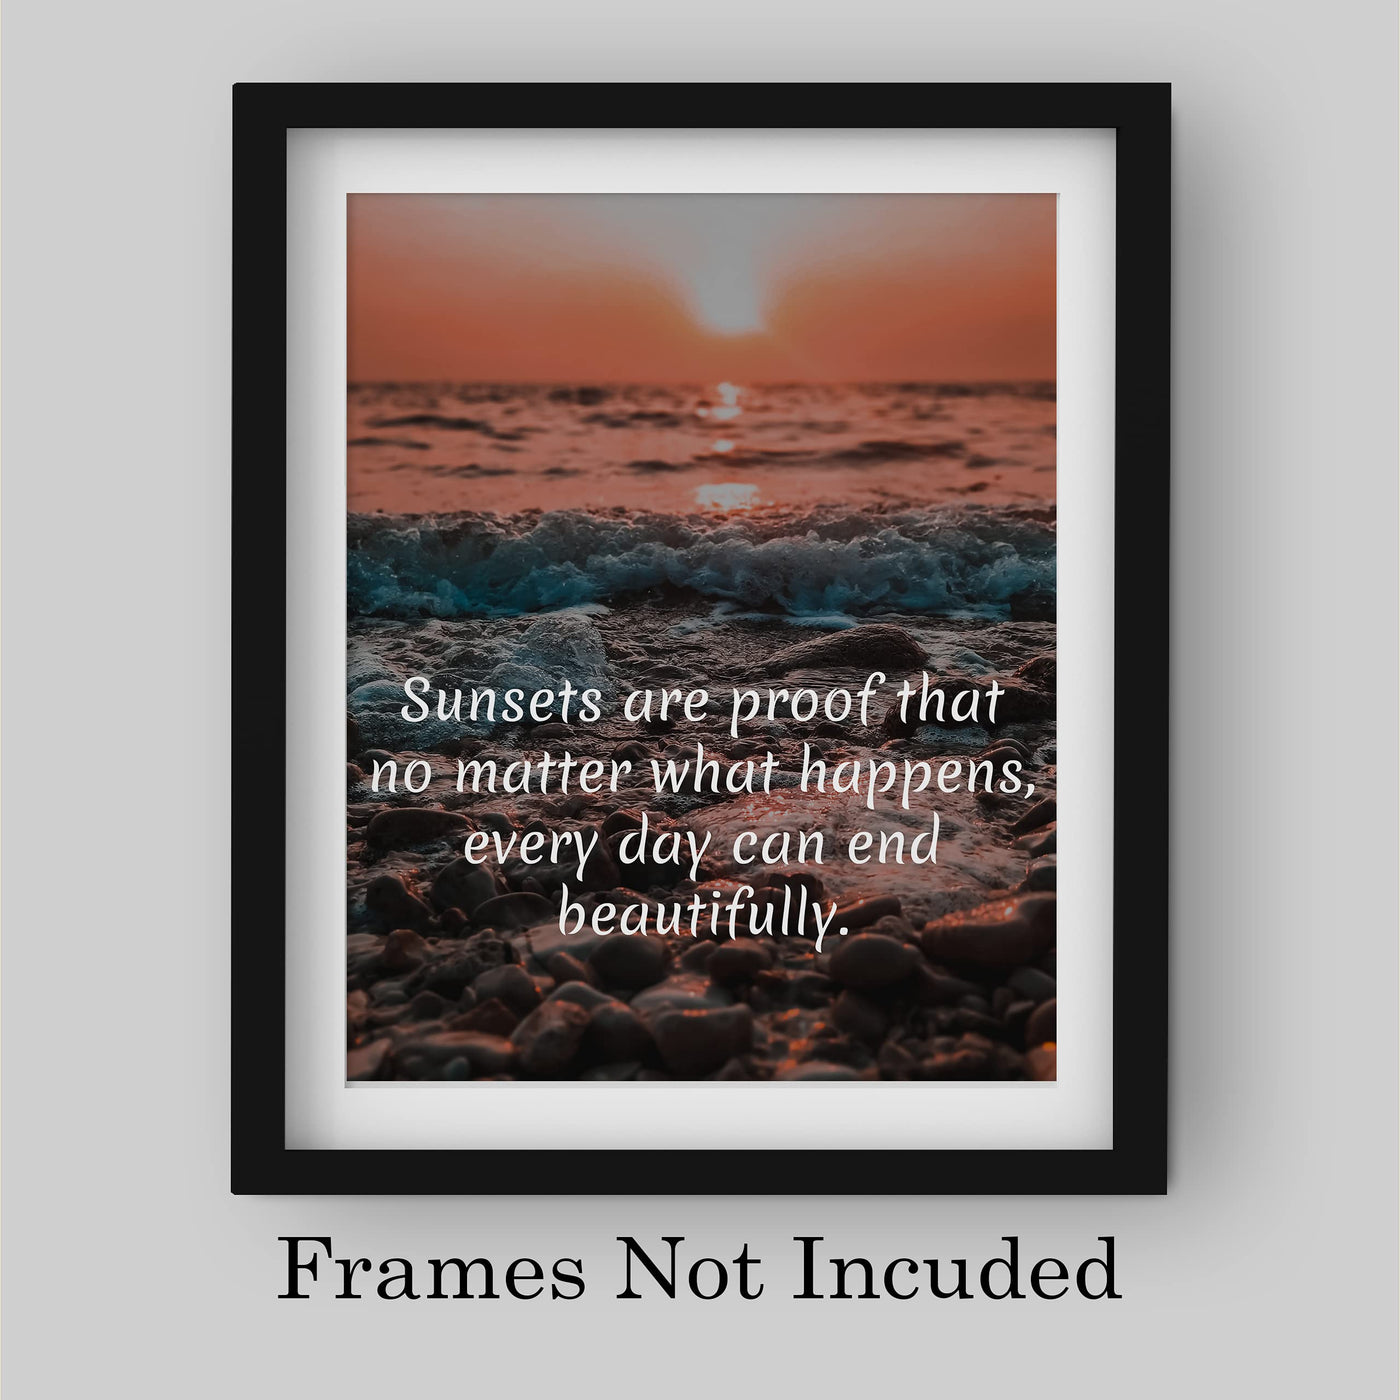 Sunsets-Proof That No Matter What, Every Day Can End Beautifully Inspirational Quotes Wall Art -8 x 10" Beach Sunset Print-Ready to Frame. Home-Office-Studio-Ocean Themed Decor. Great Reminder!